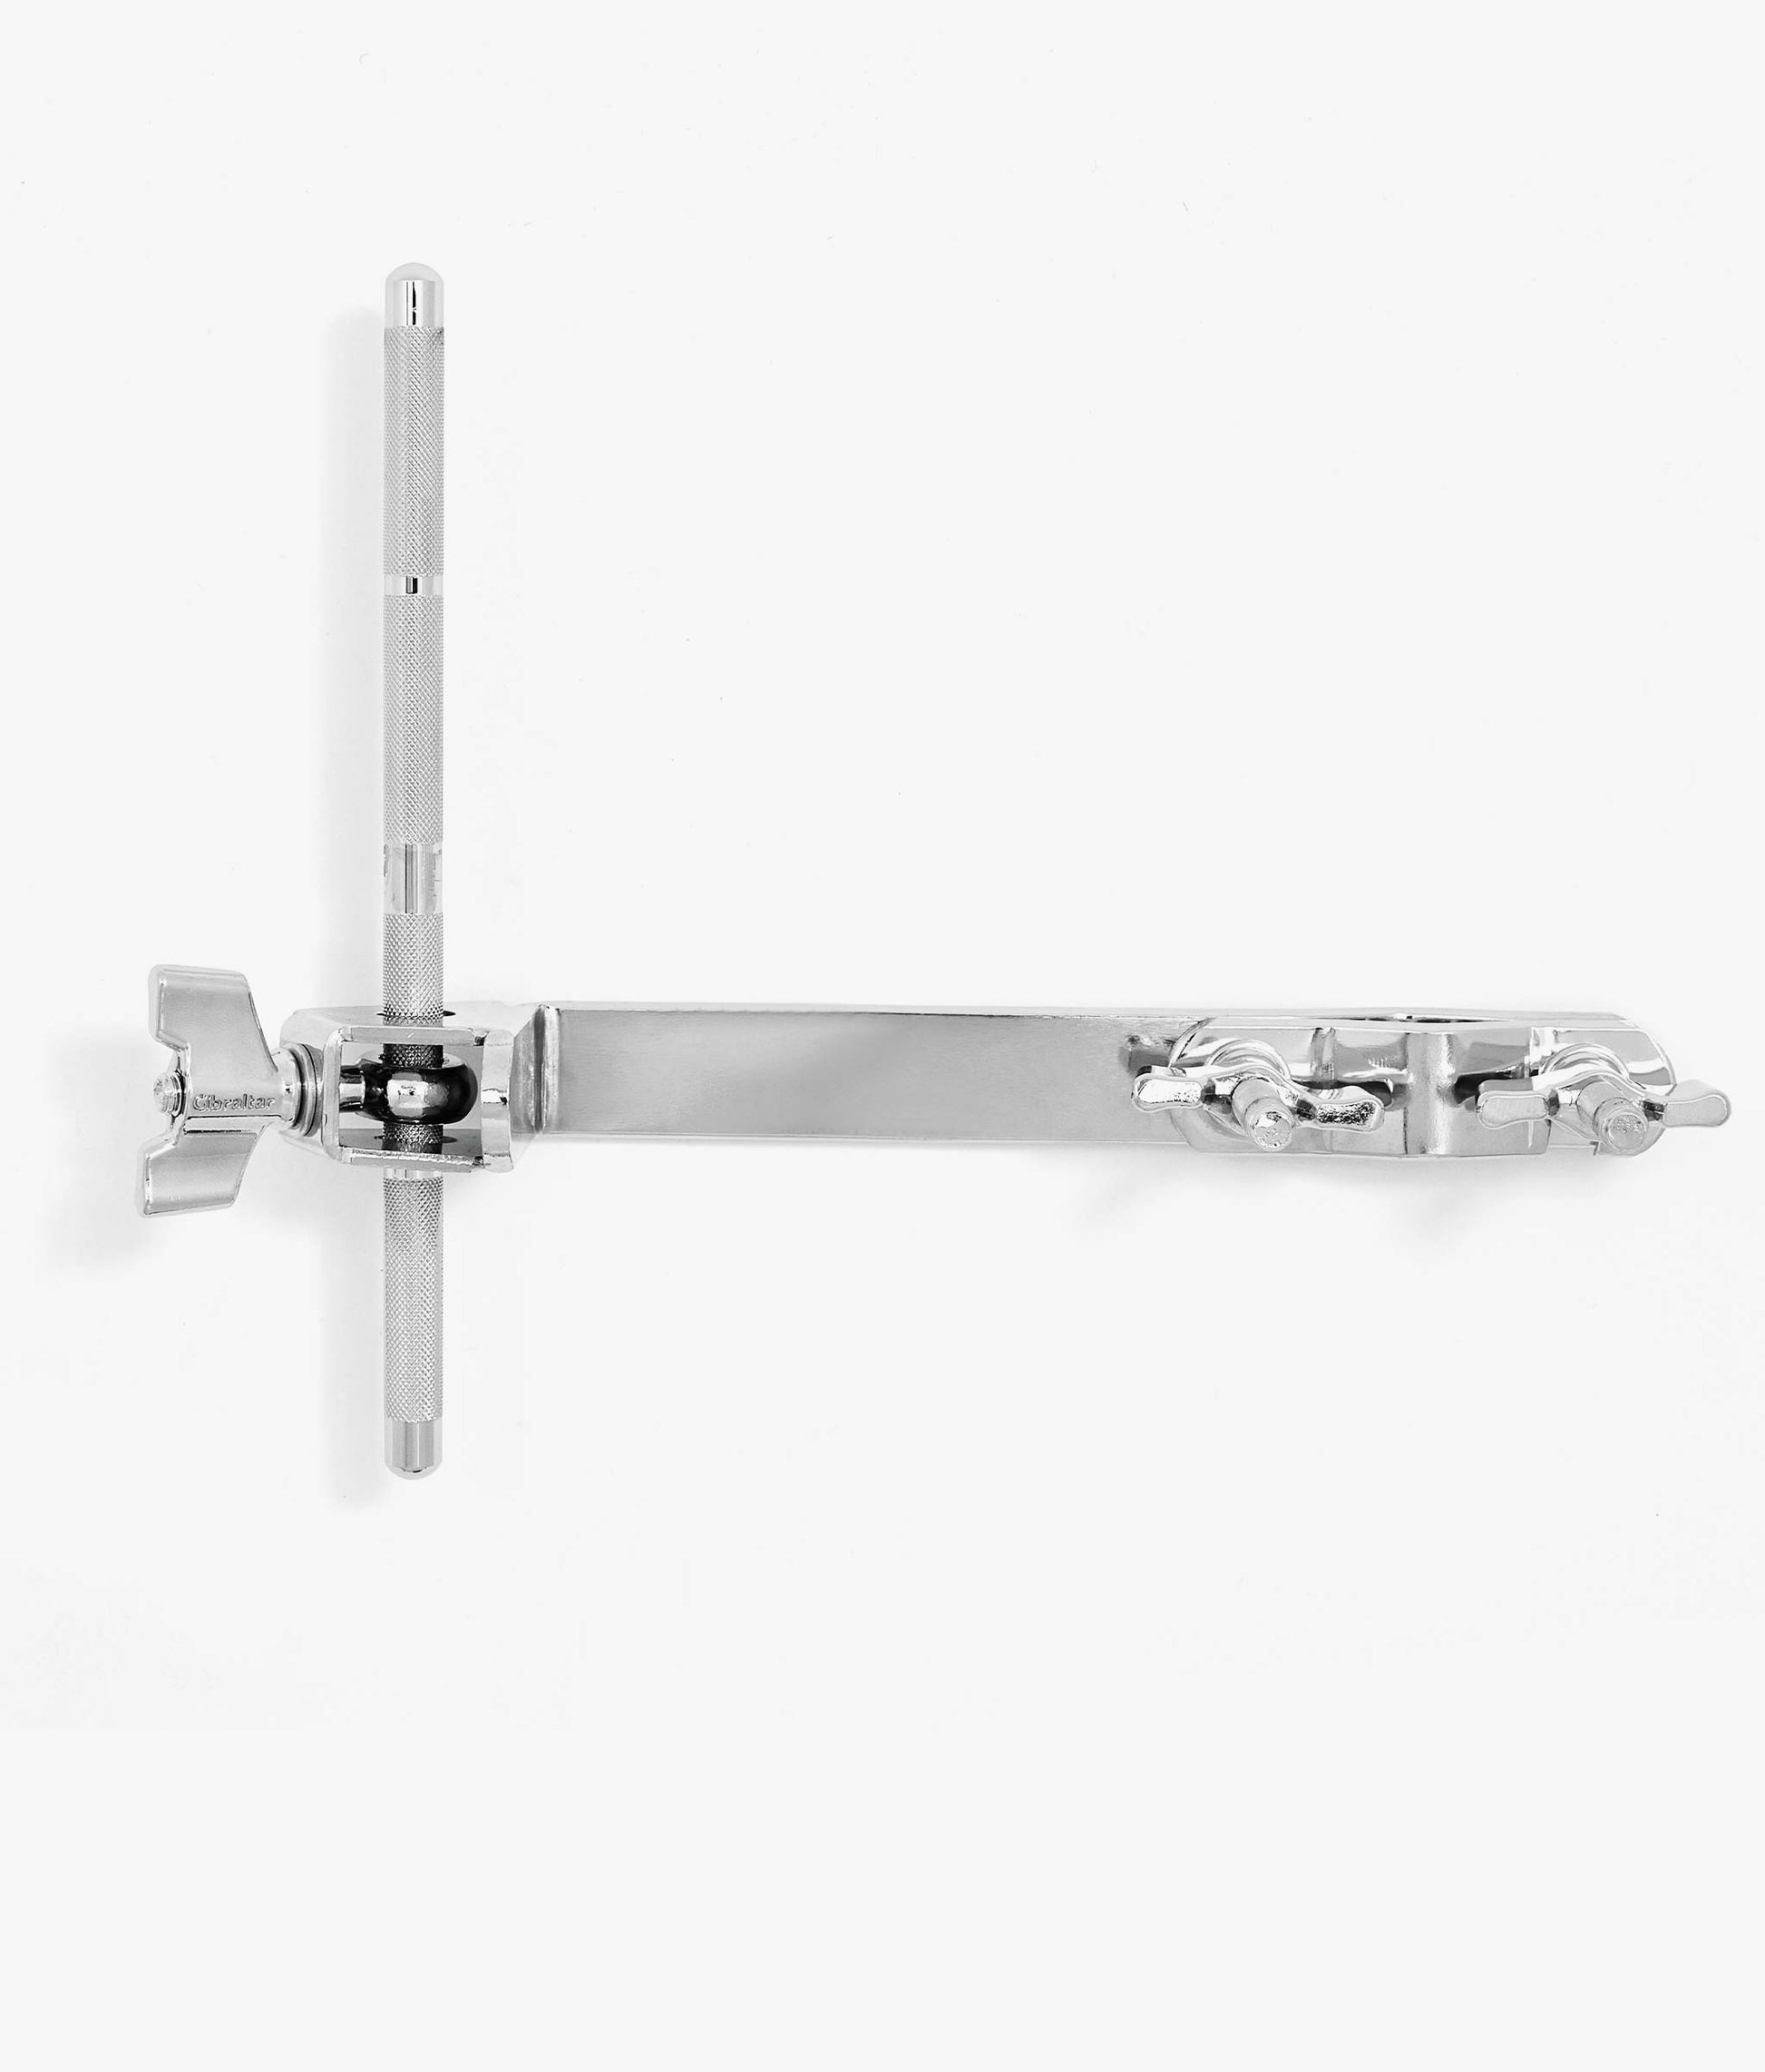  Gibraltar SC-AM1 One Post Accessory Bracket percussion accessory